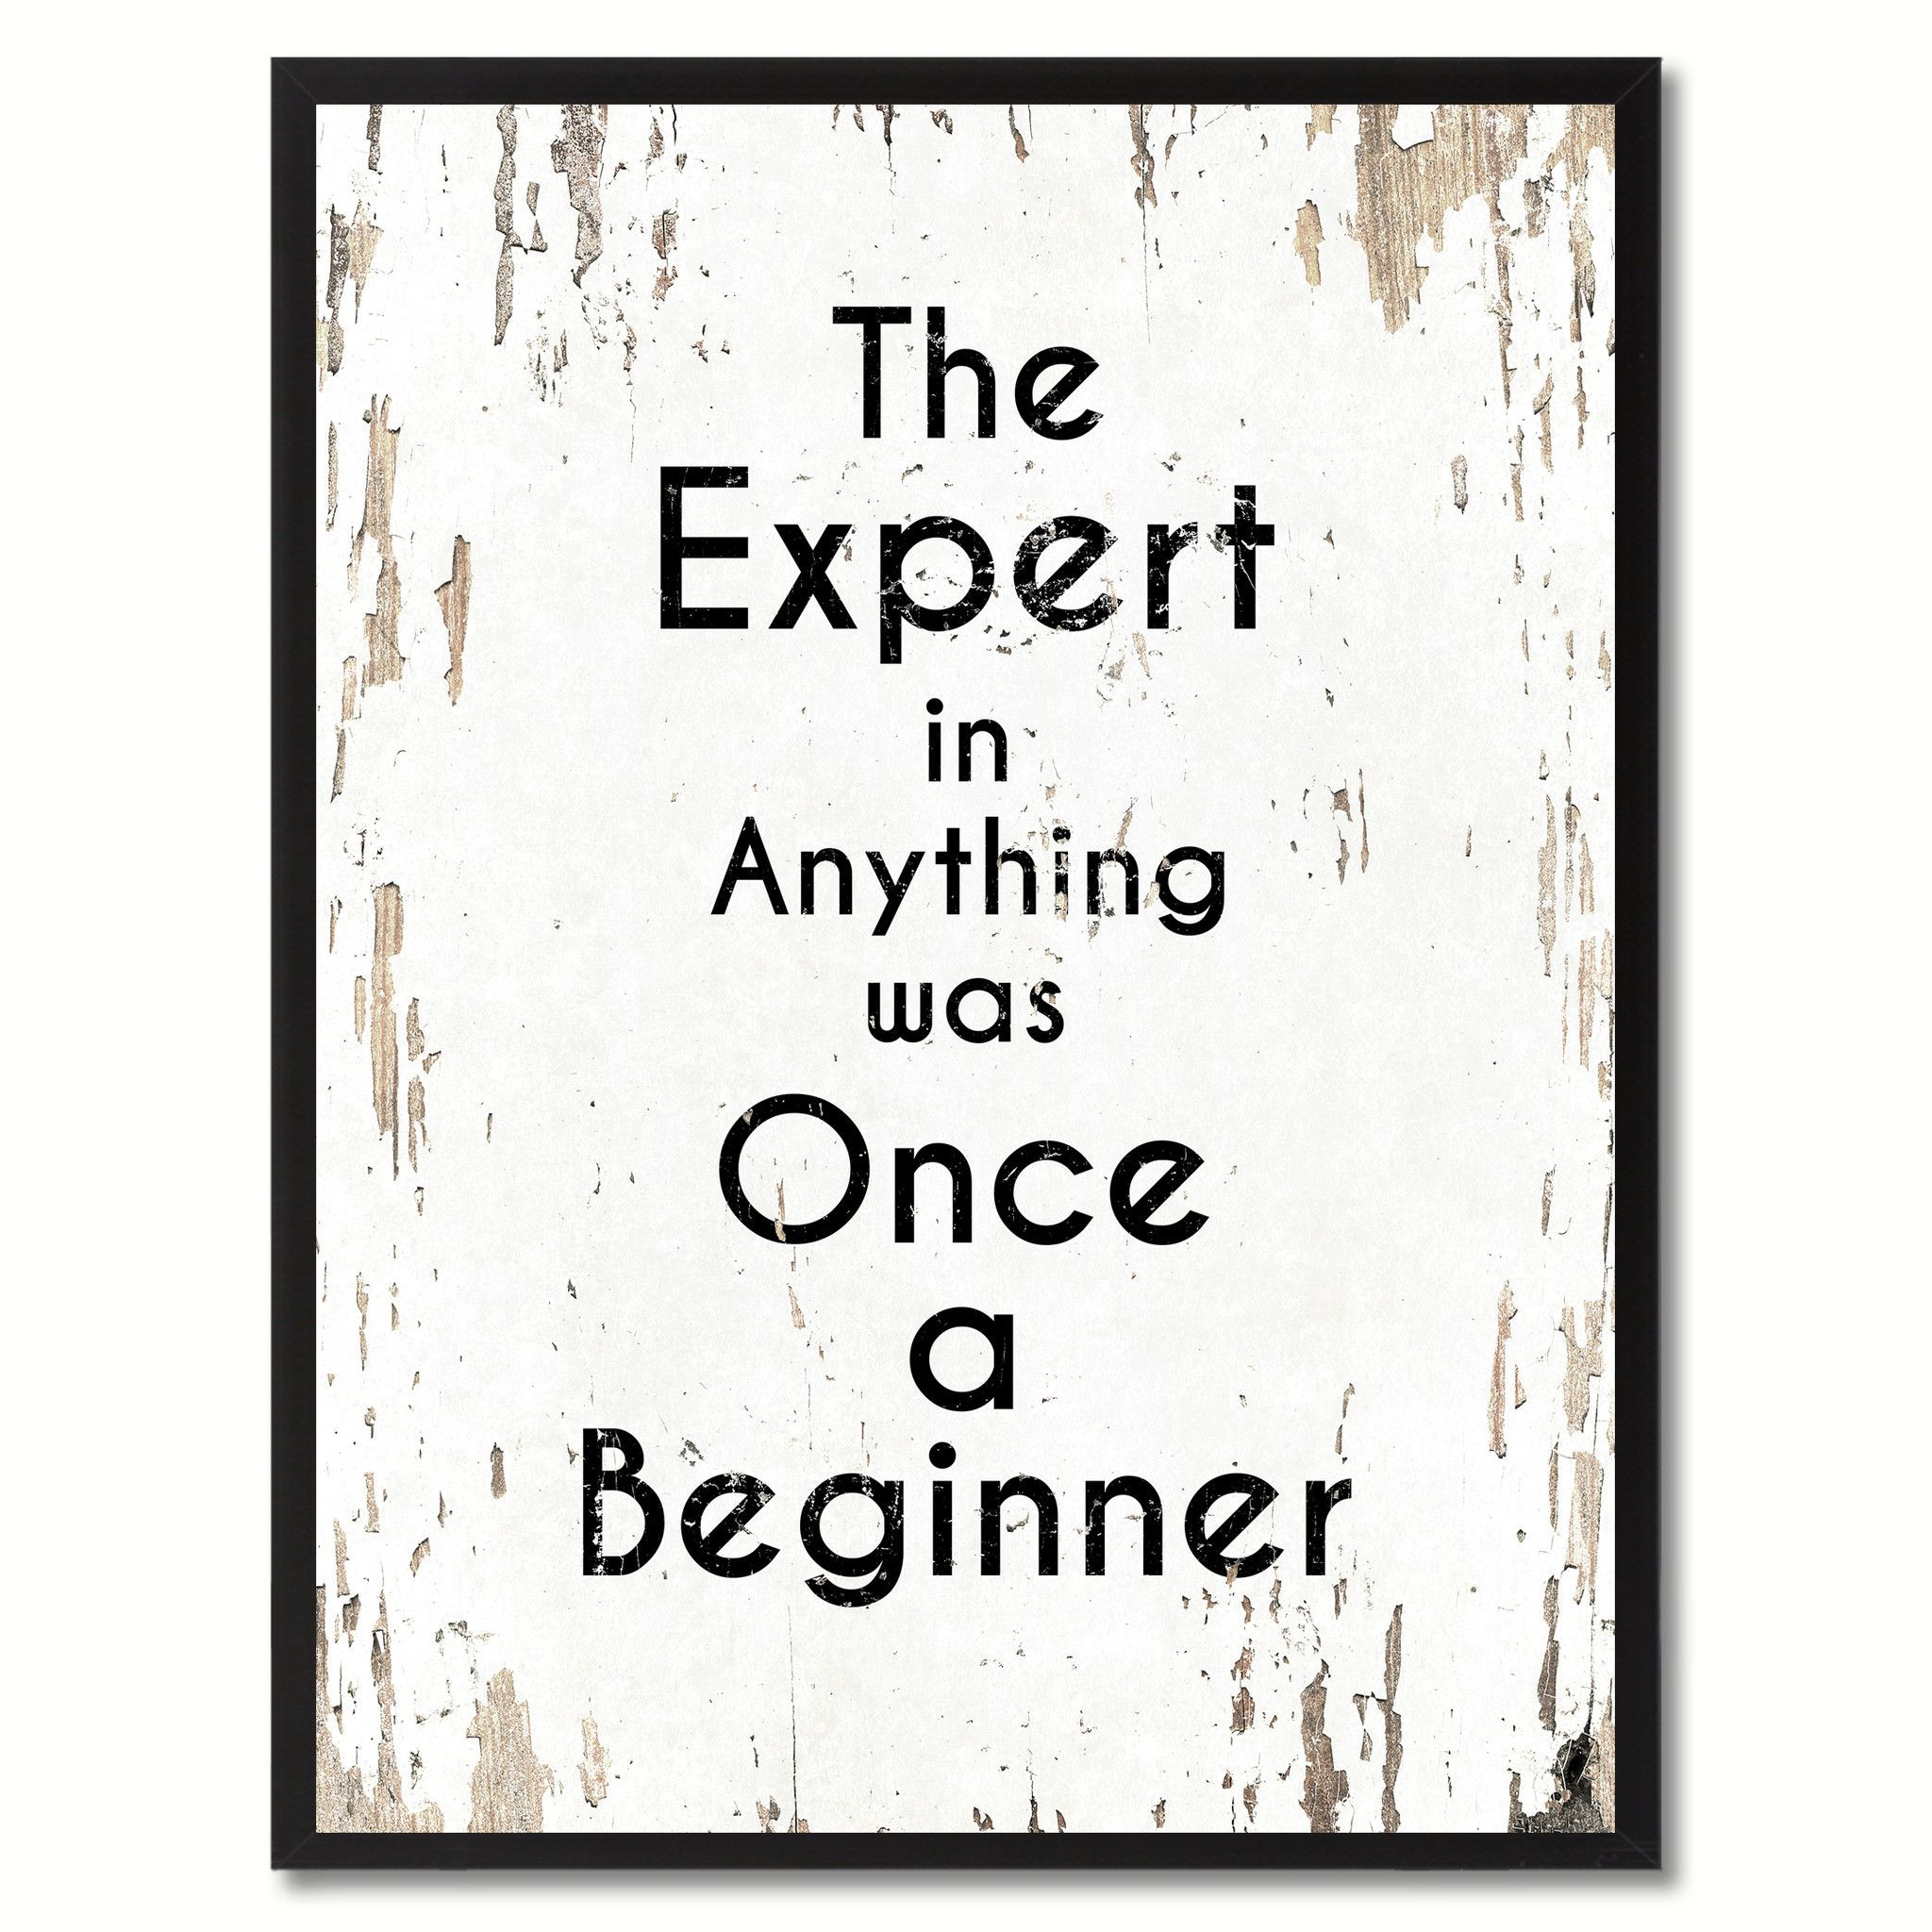 Inspirational Office Quote
 The expert in anything was once a beginner Inspirational